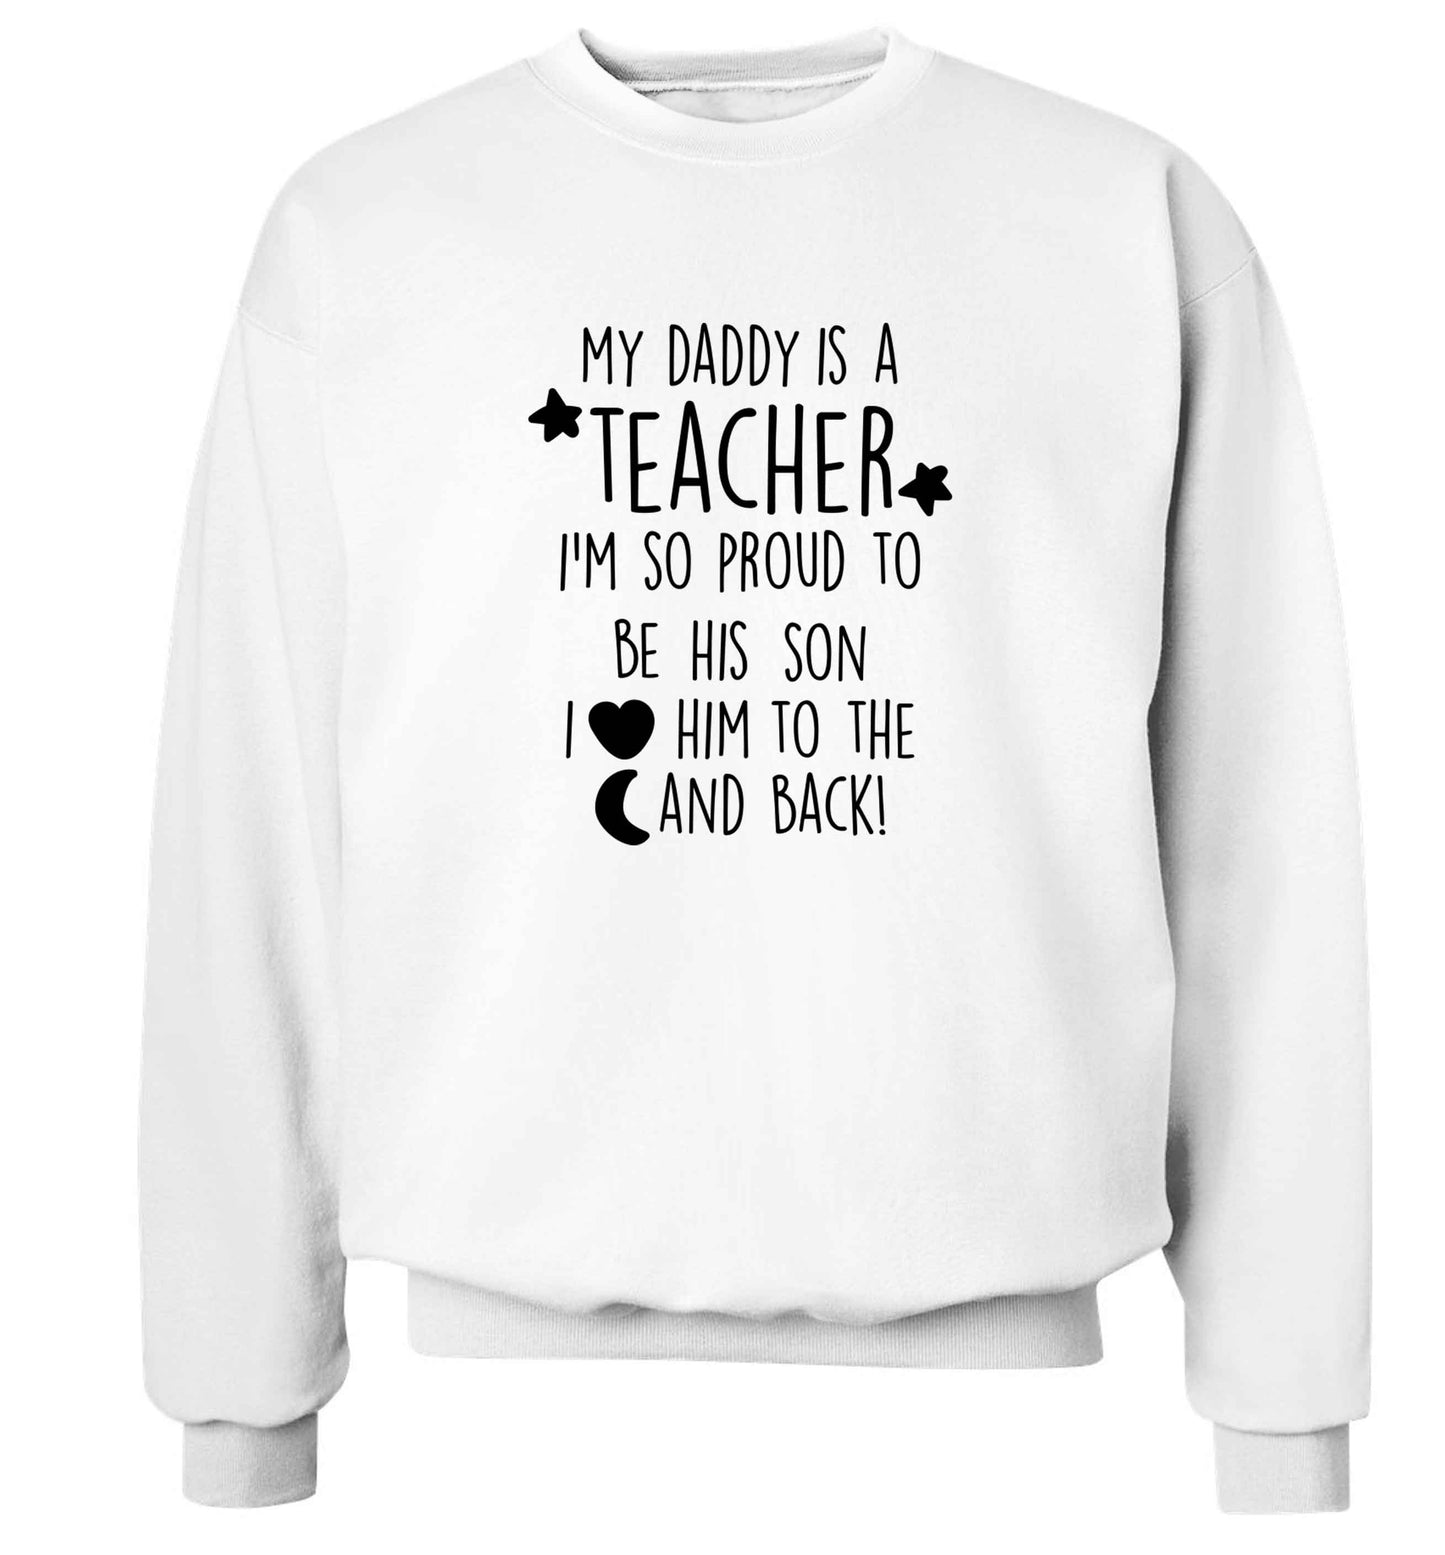 My daddy is a teacher I'm so proud to be his son I love her to the moon and back adult's unisex white sweater 2XL